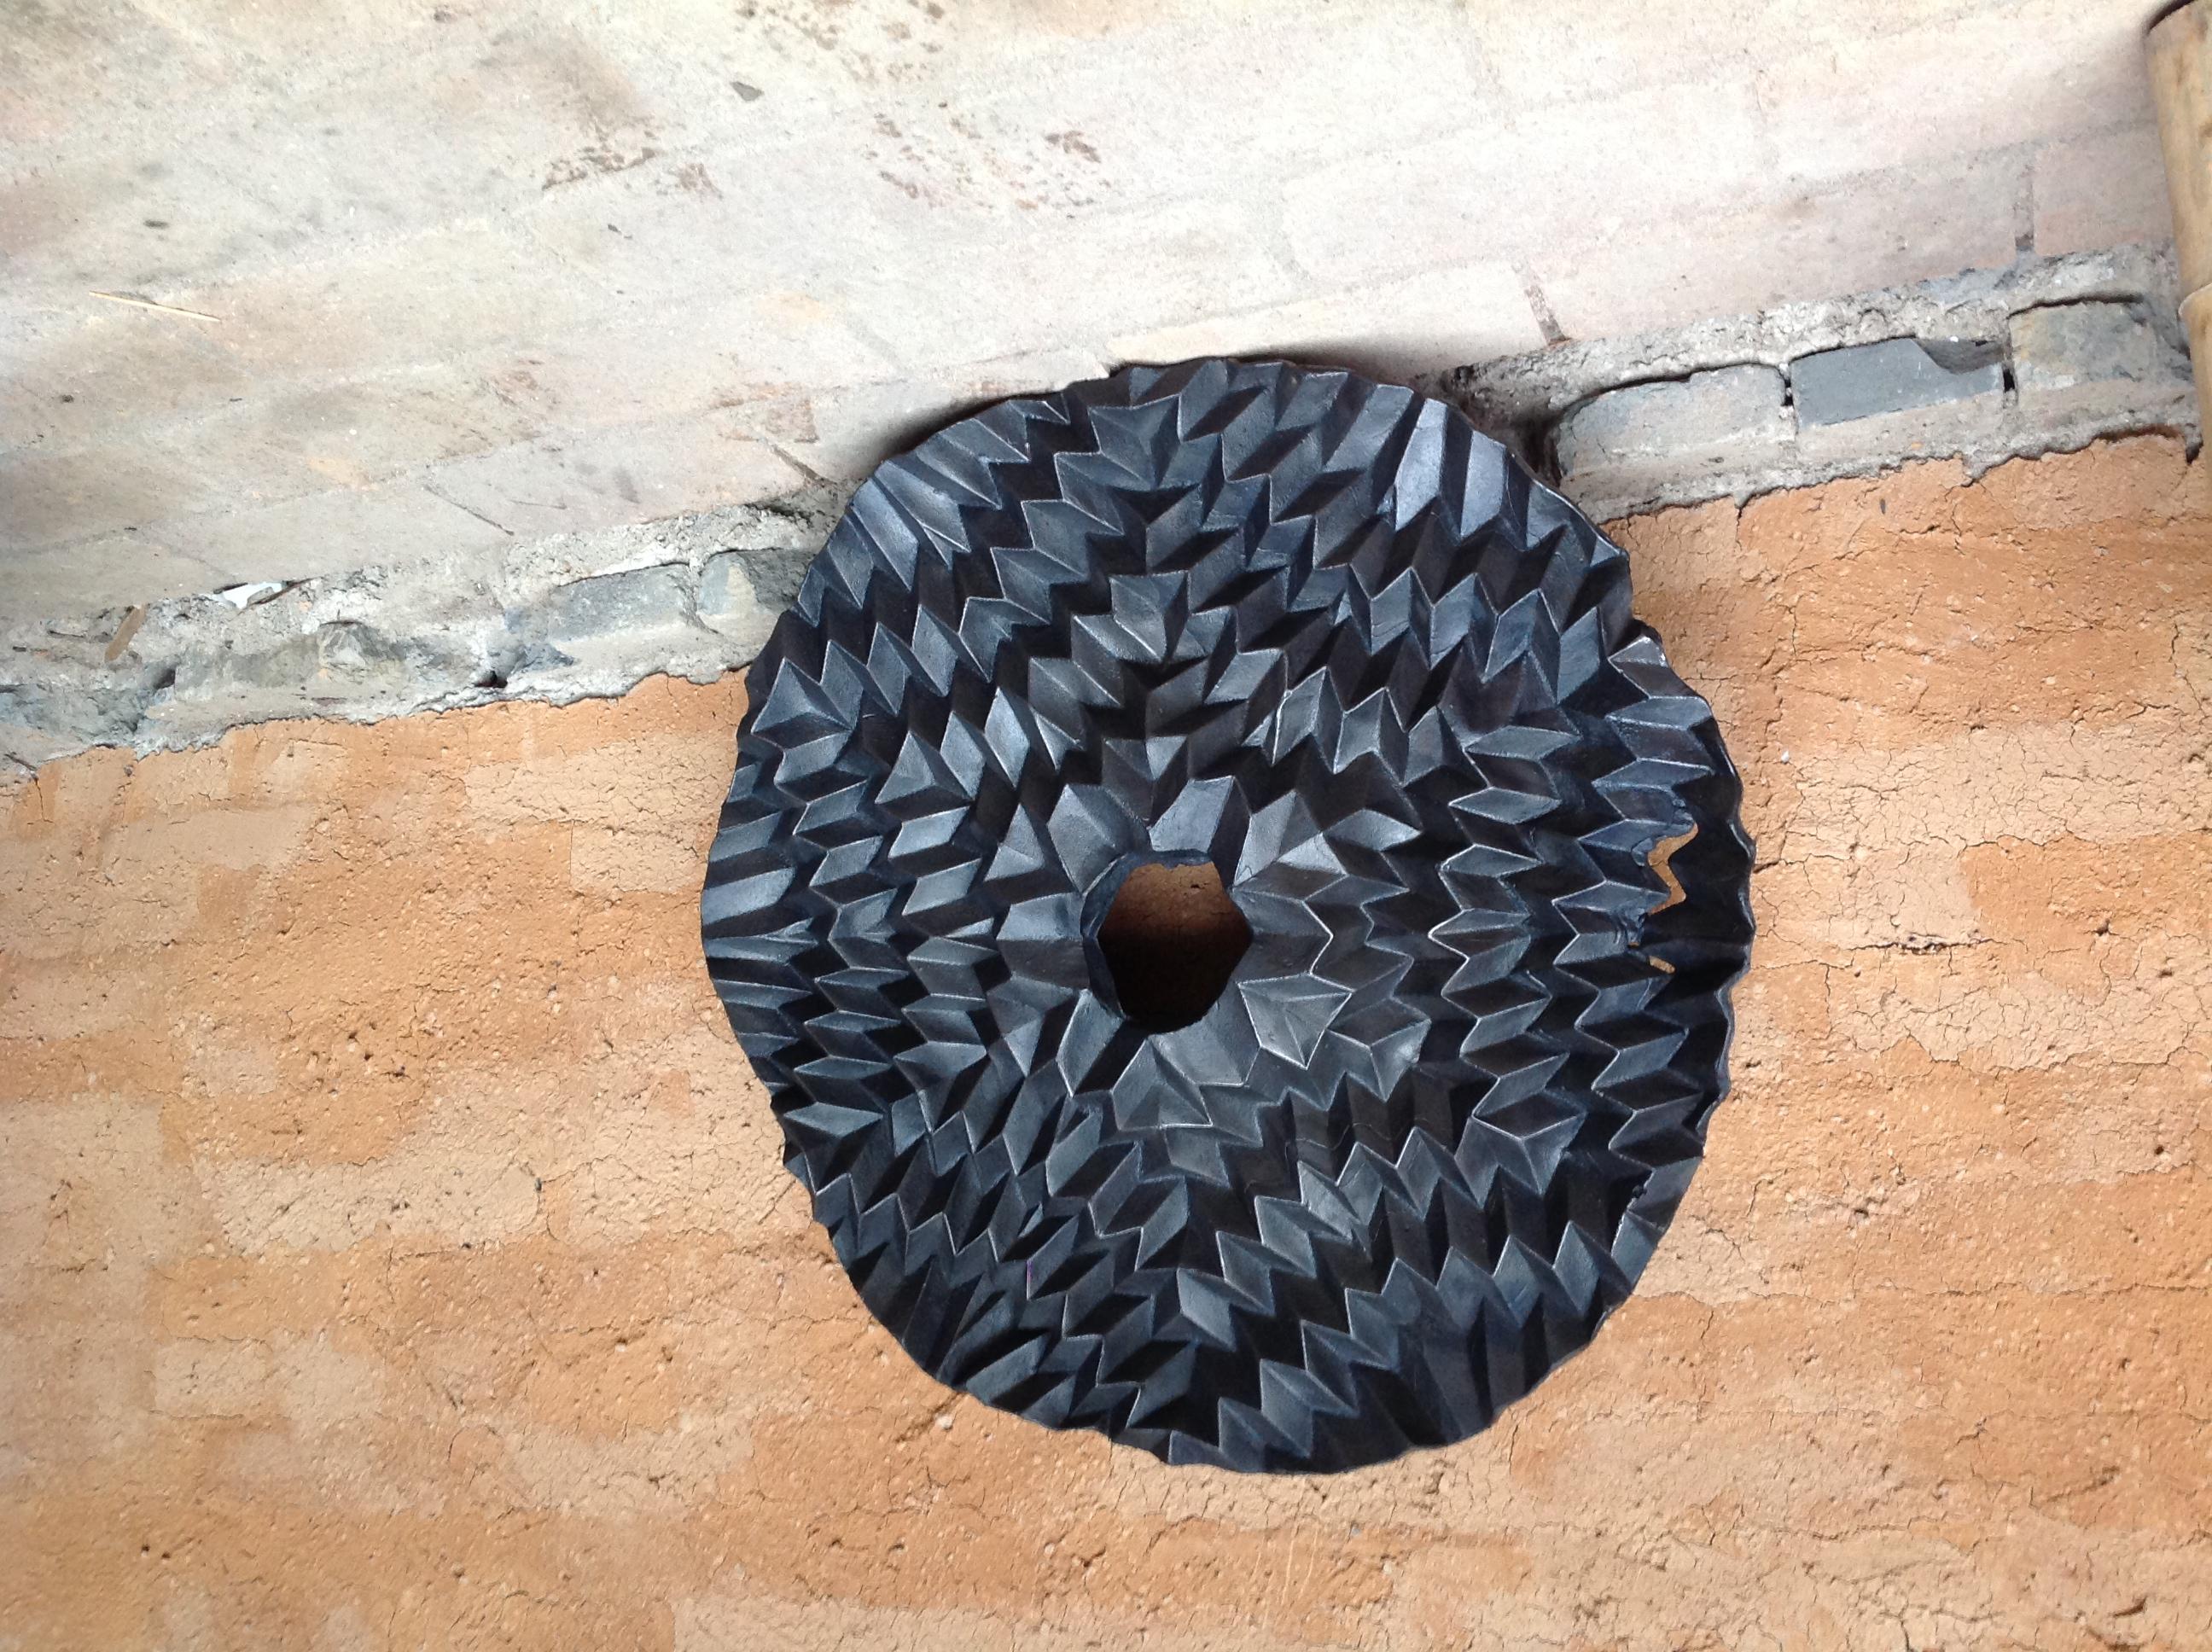 A black textured sculpture rests against the wall.